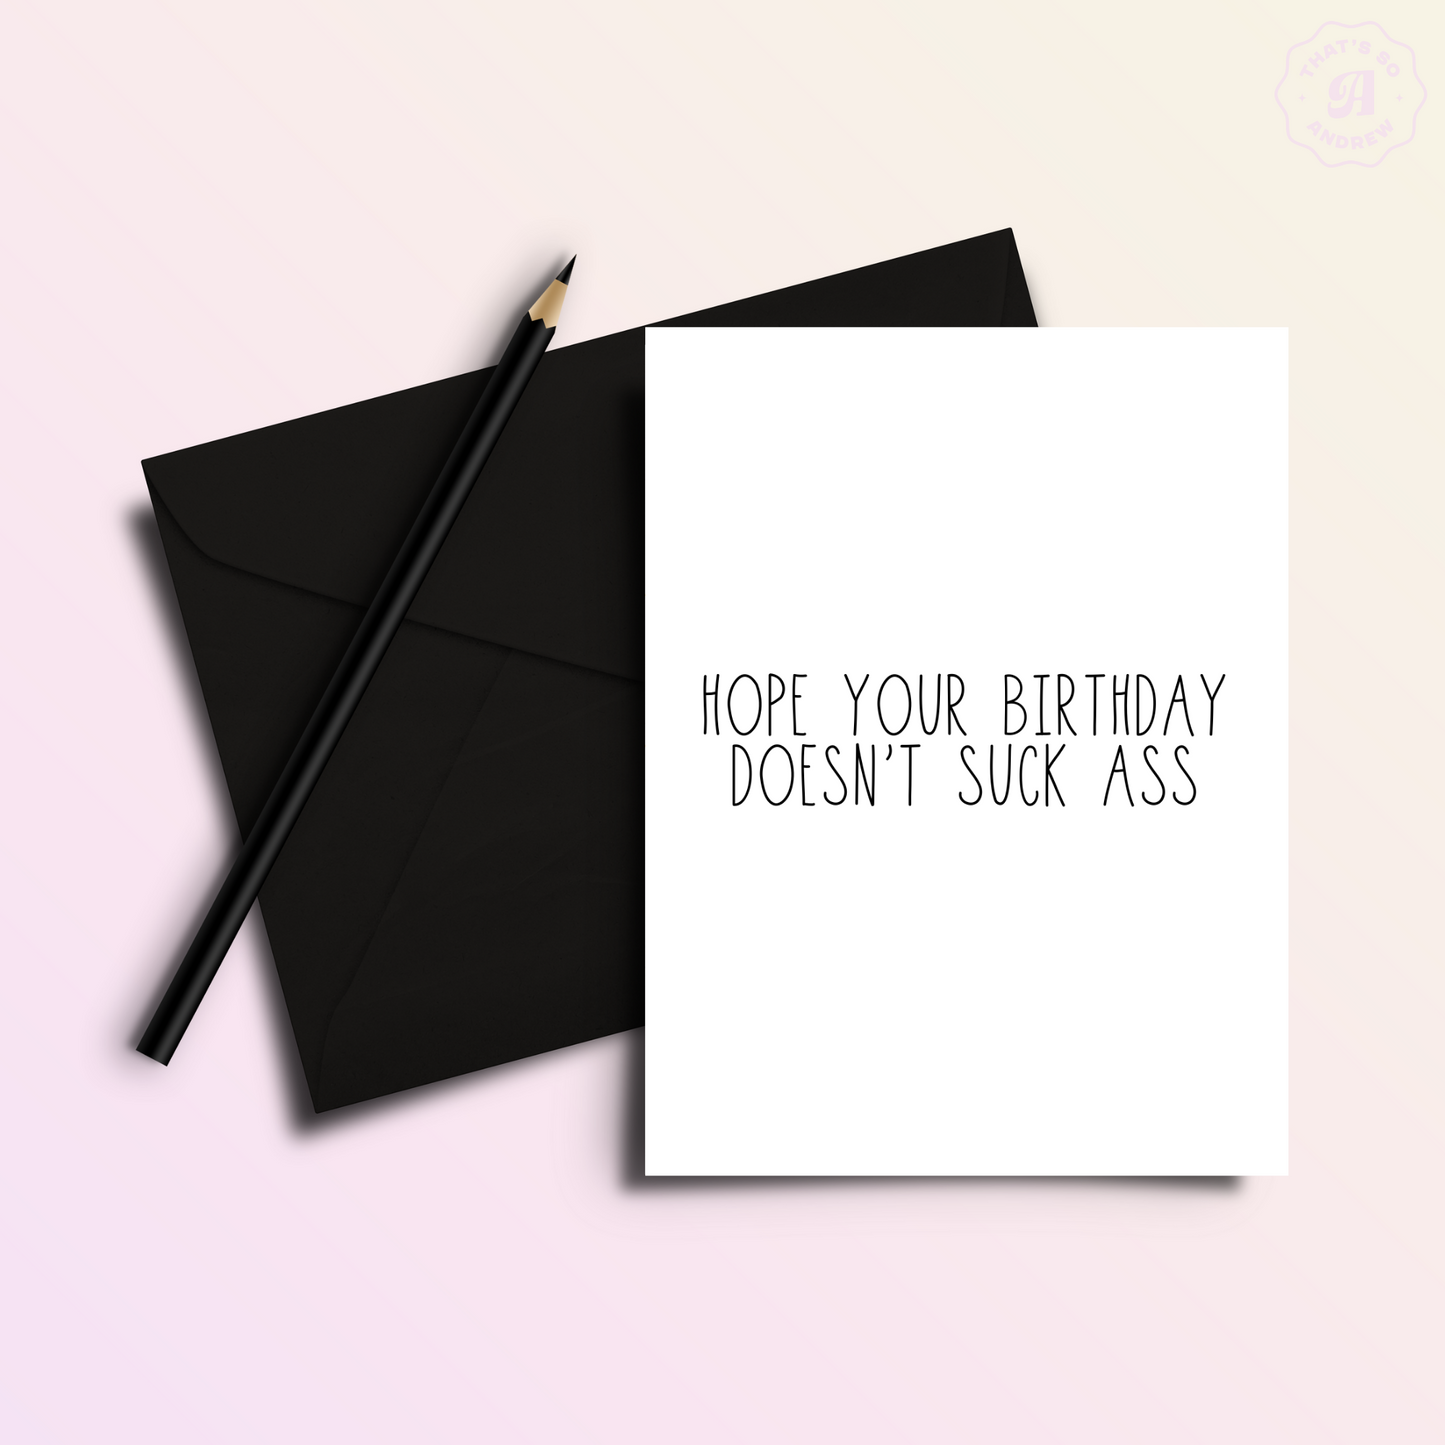 Hope Your Birthday Doesn't Suck Ass Card